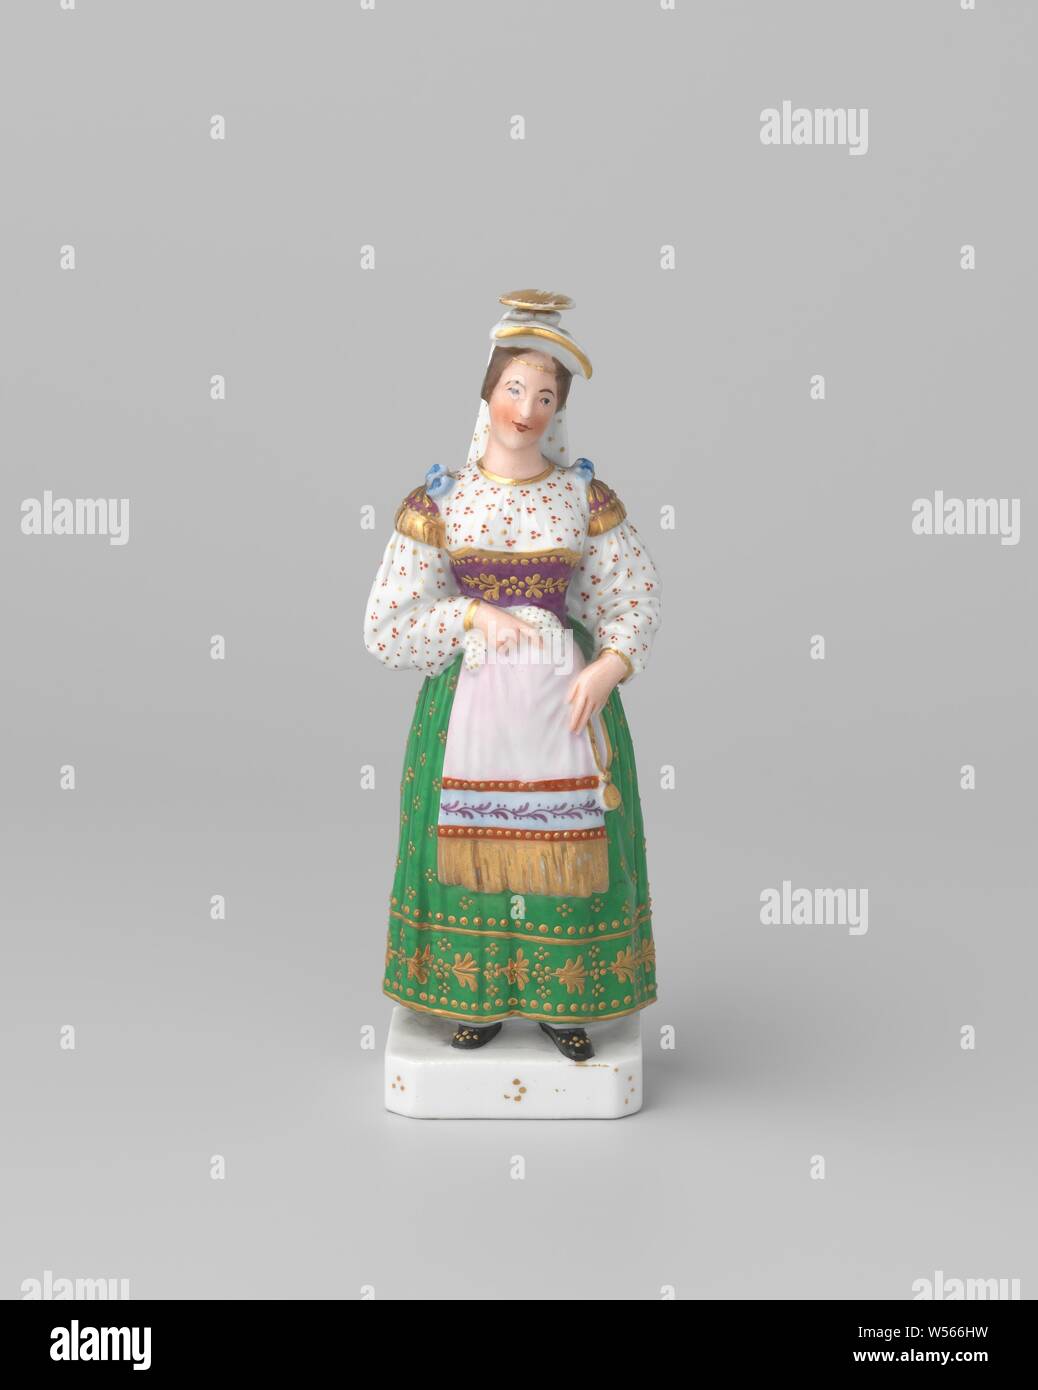 Bottle in the shape of a woman in folk costume, Bottle of porcelain, painted on the enamel in enamel colors and gold. The bottle is in the shape of a woman in French costume. On her head the opening, closed with a porcelain stopper. Marked on the bottom with J.P., school van Fontainebleau, Fontainebleau, c. 1800 - c. 1810, porcelain (material), glaze, gold (metal), vitrification, h 18.2 cm w 6.6 cm × d 5.5 cm Stock Photo